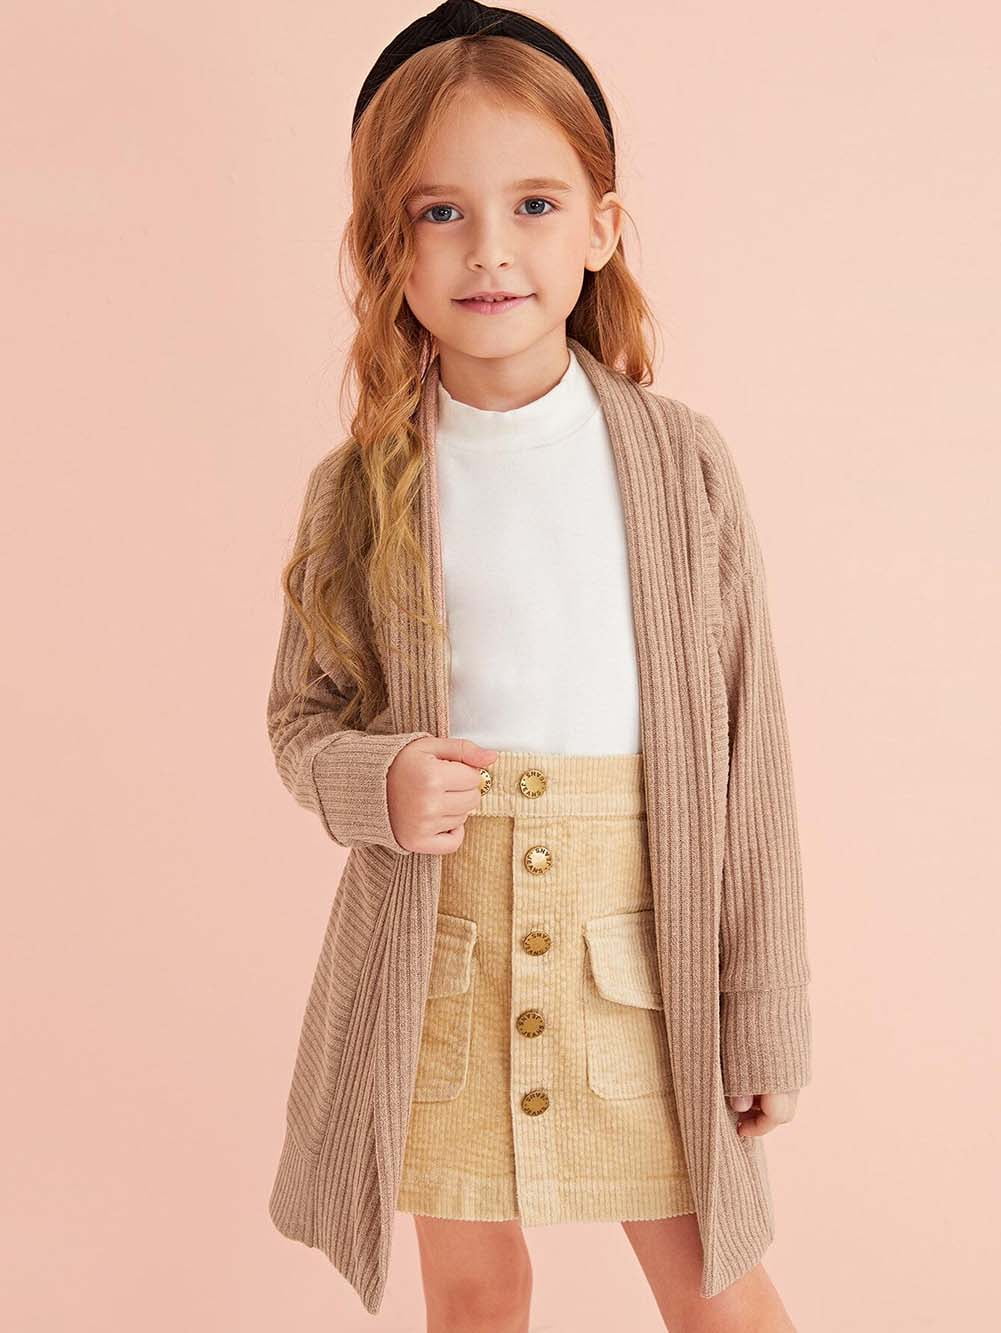 Kid's Girl Casual Sweater Long Sleeve Open Front Knit Cardigan Coat Knee Length Knitwear Outerwear for Fall 